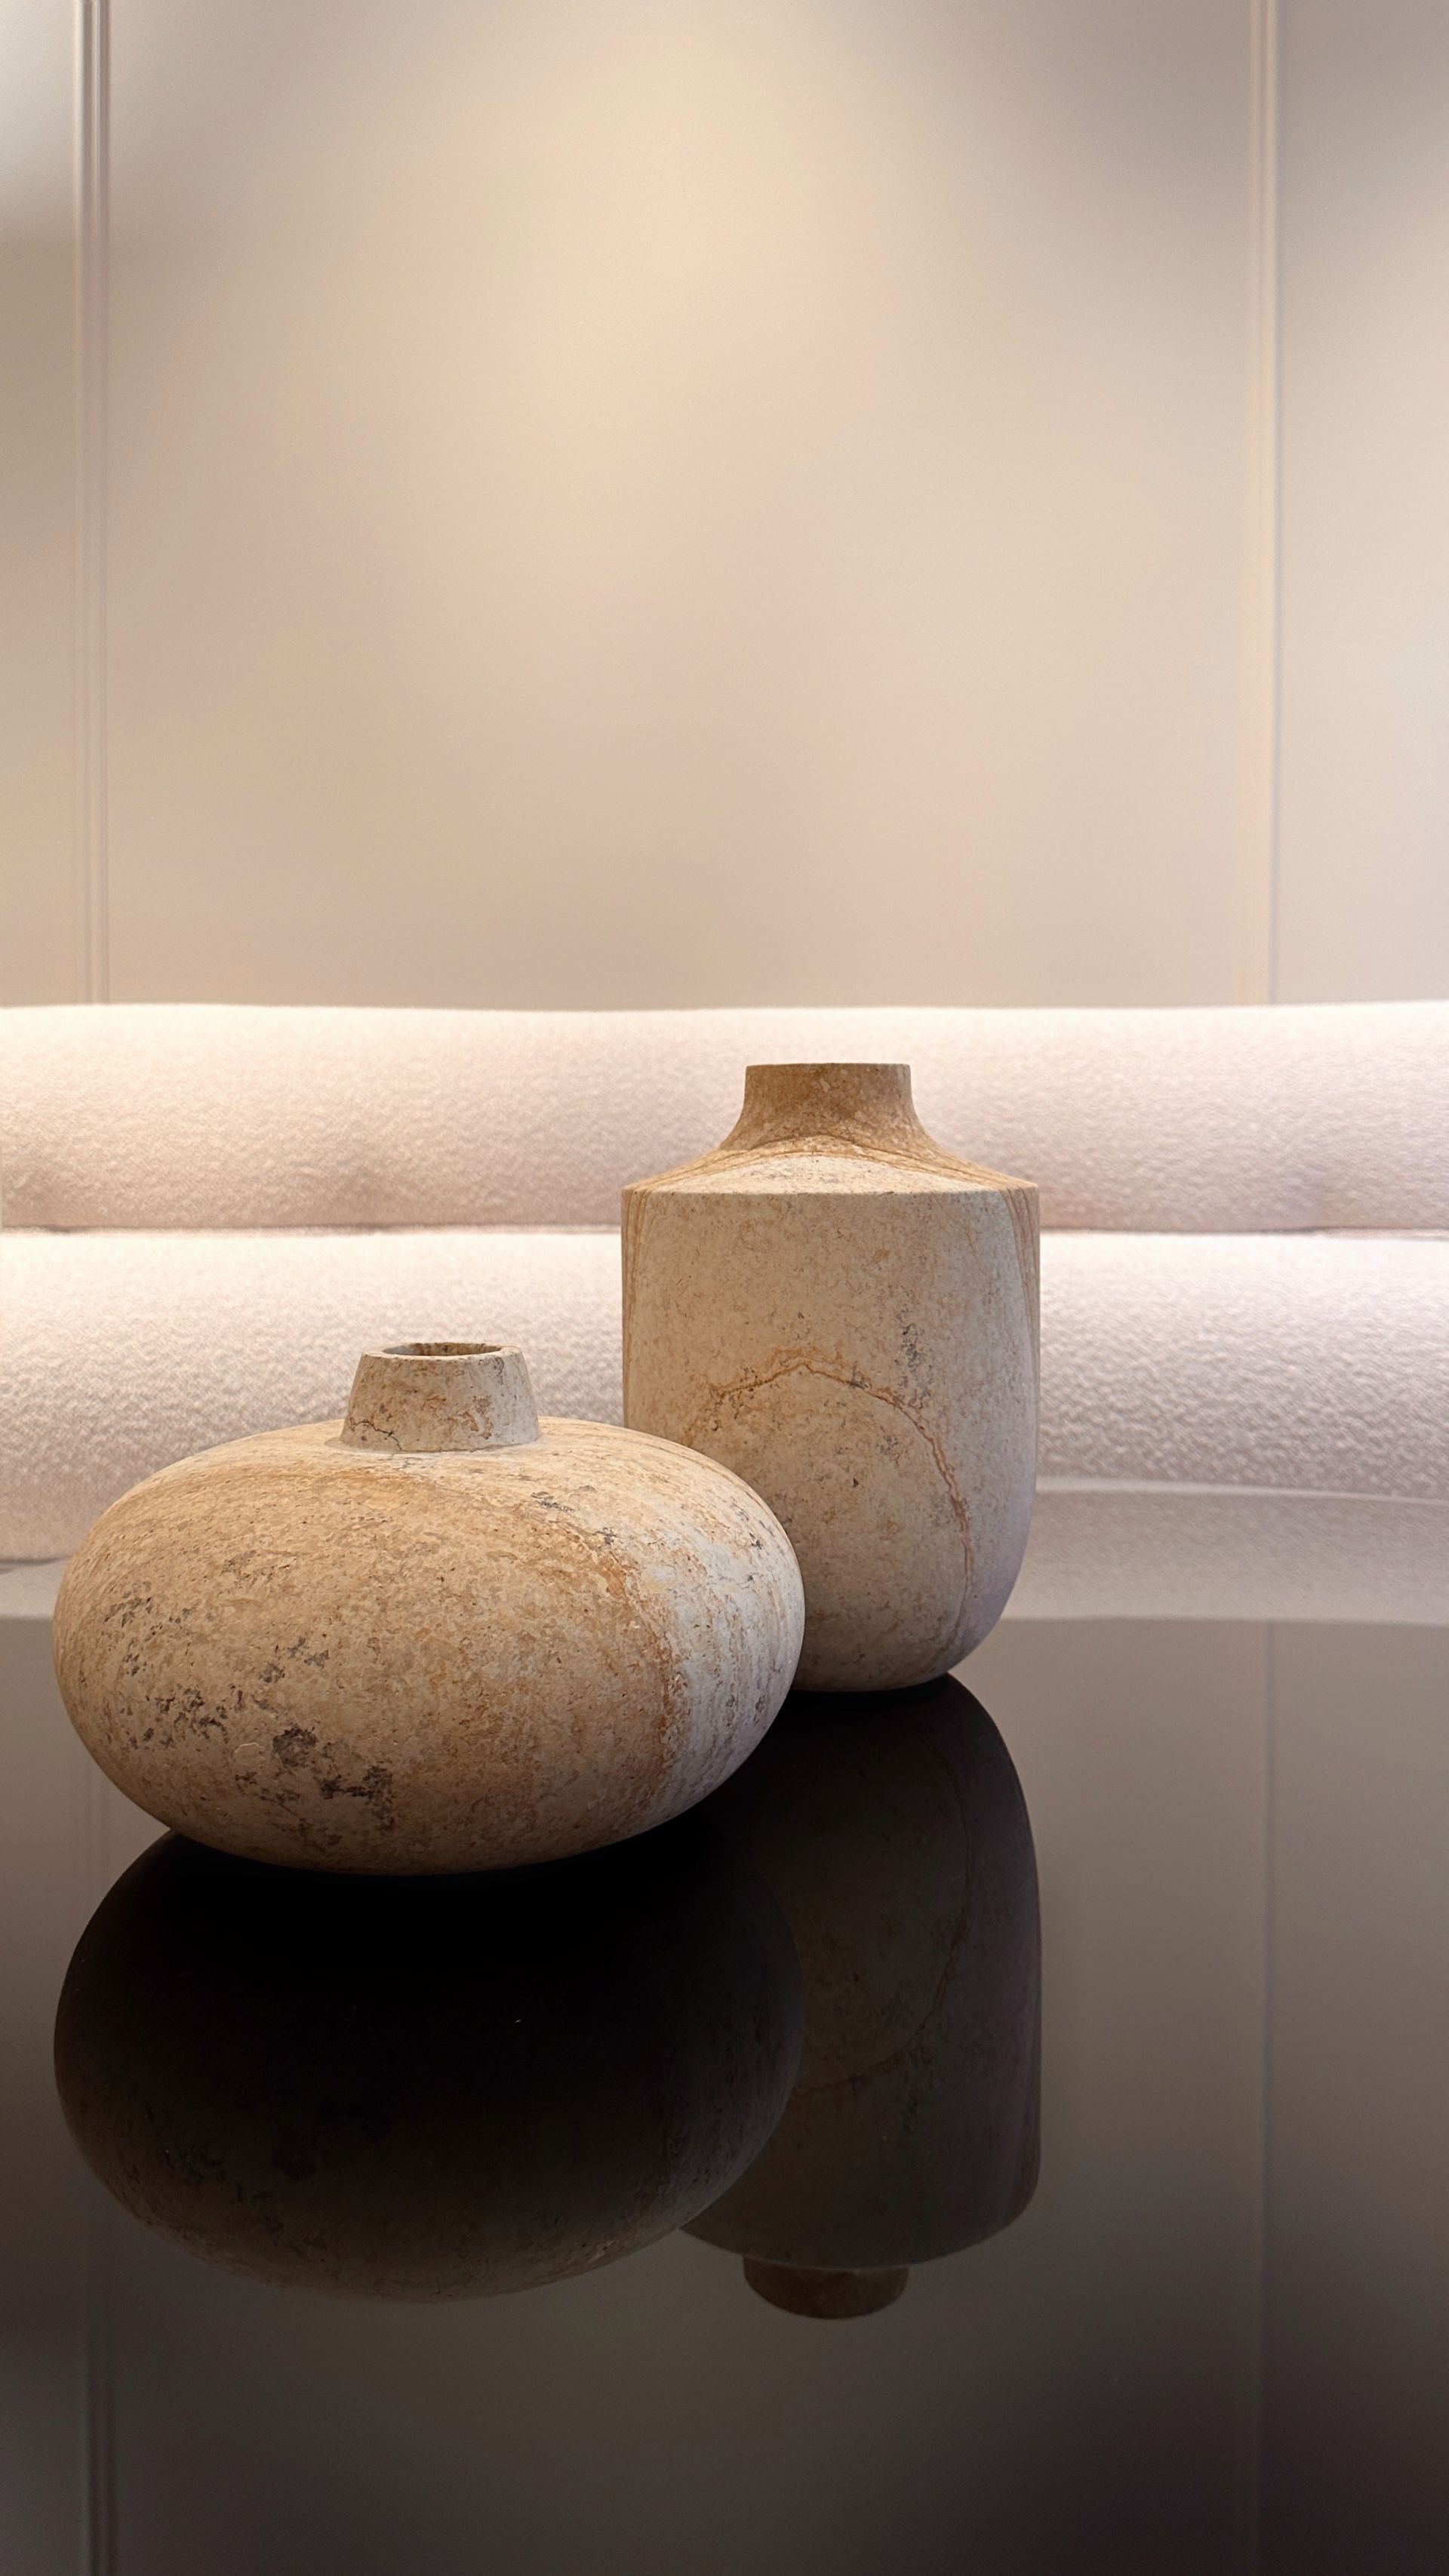 image showing a close-up of travertine vases from Marmi Serafini